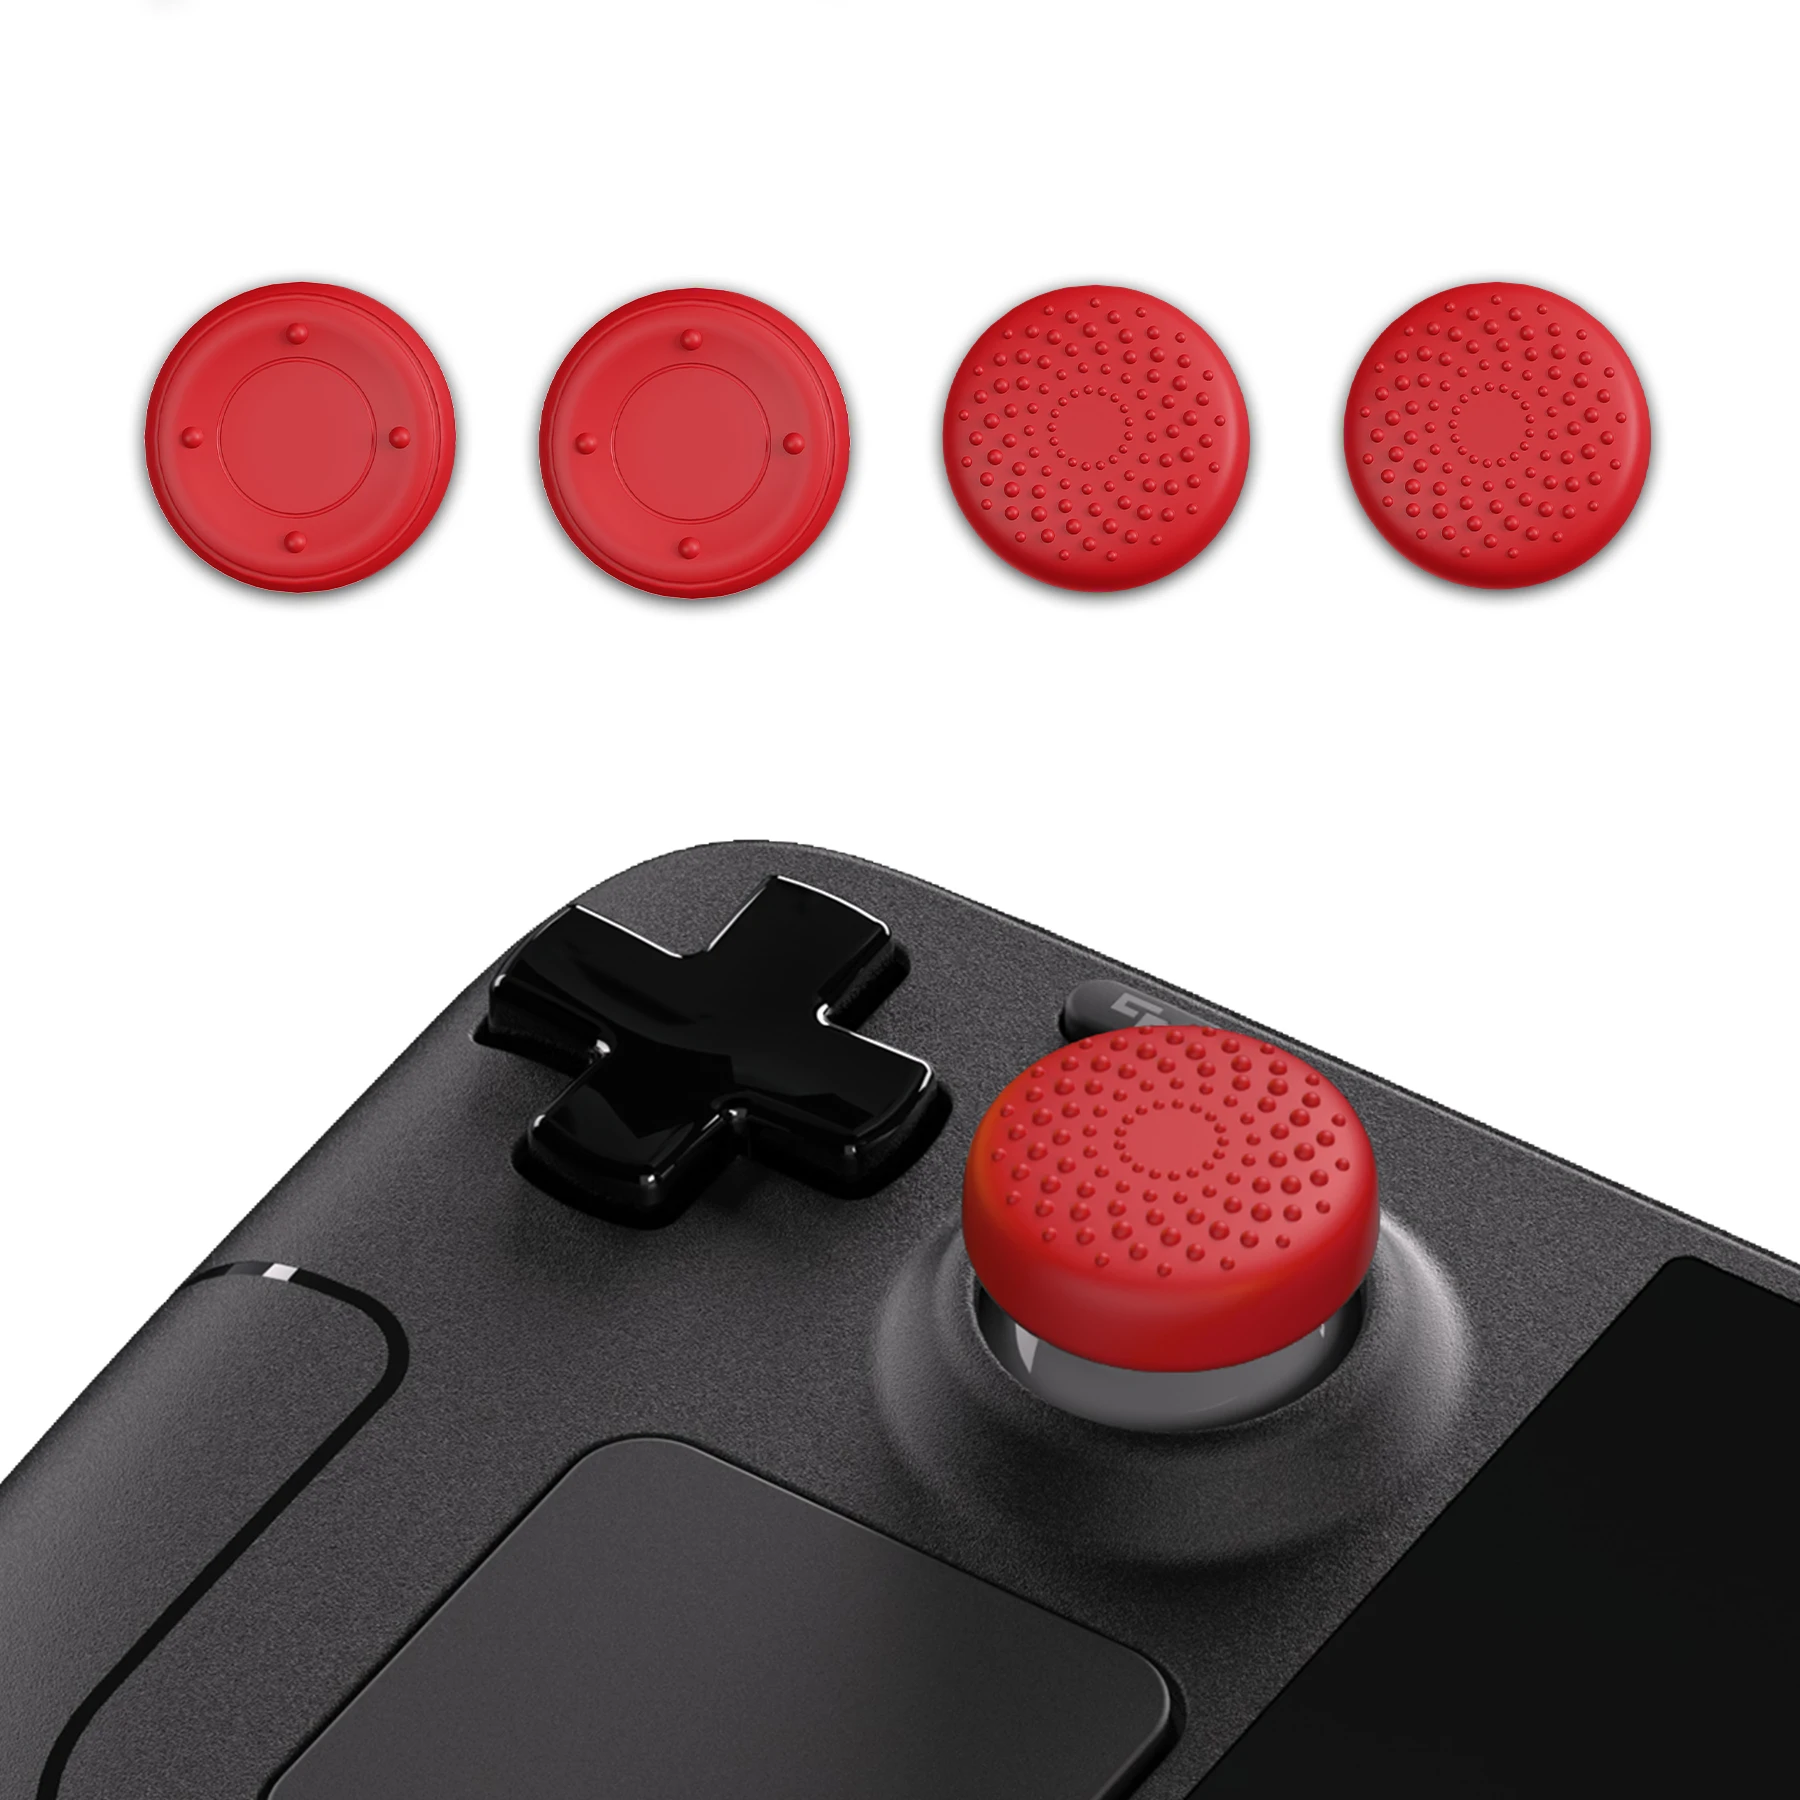 

PlayVital Thumb Grip Caps Silicone Thumbsticks Grips Joystick Caps for Steam Deck - Raised Dots & Studded Design- Passion Red